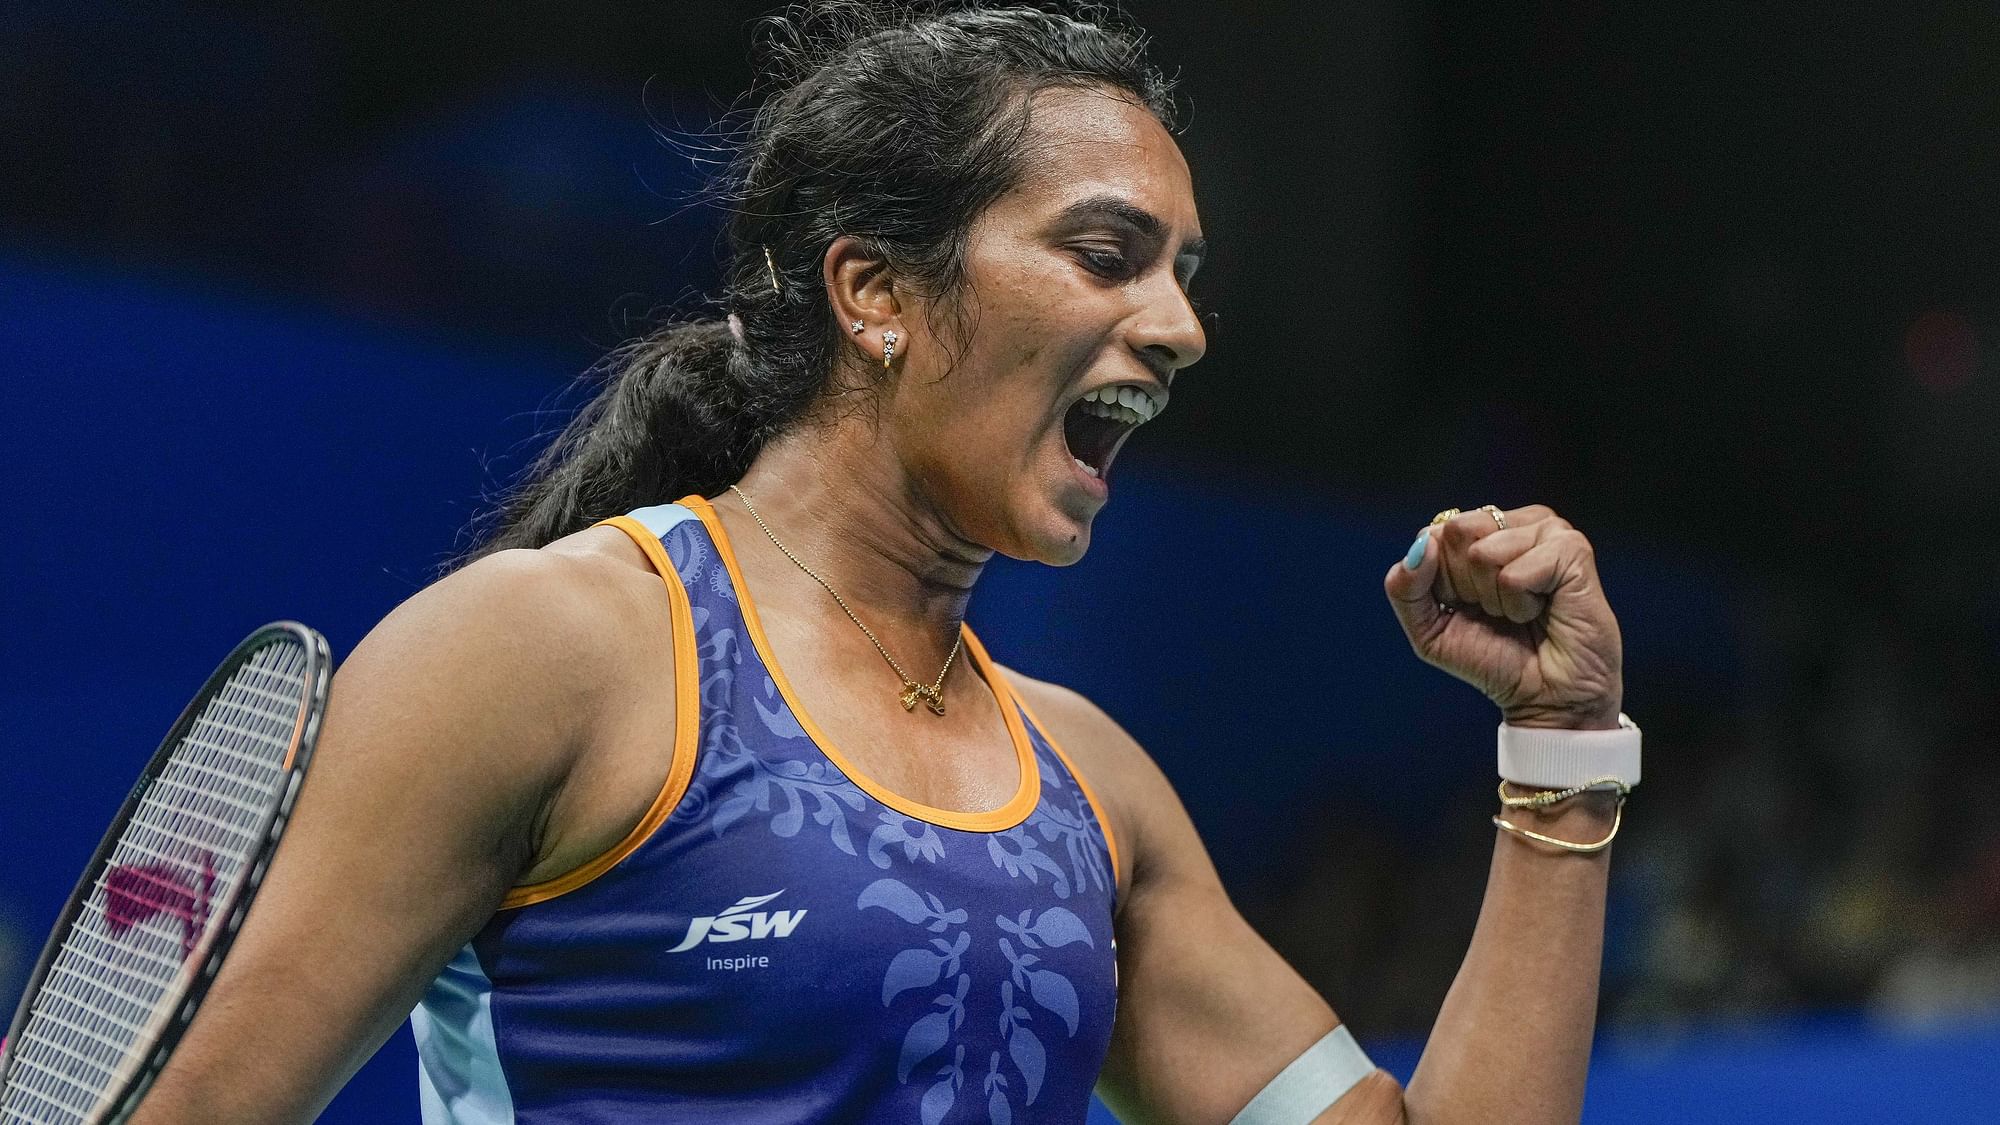 <div class="paragraphs"><p>India's PV Sindhu reacts after winning a point against Wen-Chi Hsu of Chinese Taipei during their womens singles badminton match at the 19th Asian Games, in Hangzhou, China, Tuesday, Oct. 3, 2023.</p></div>